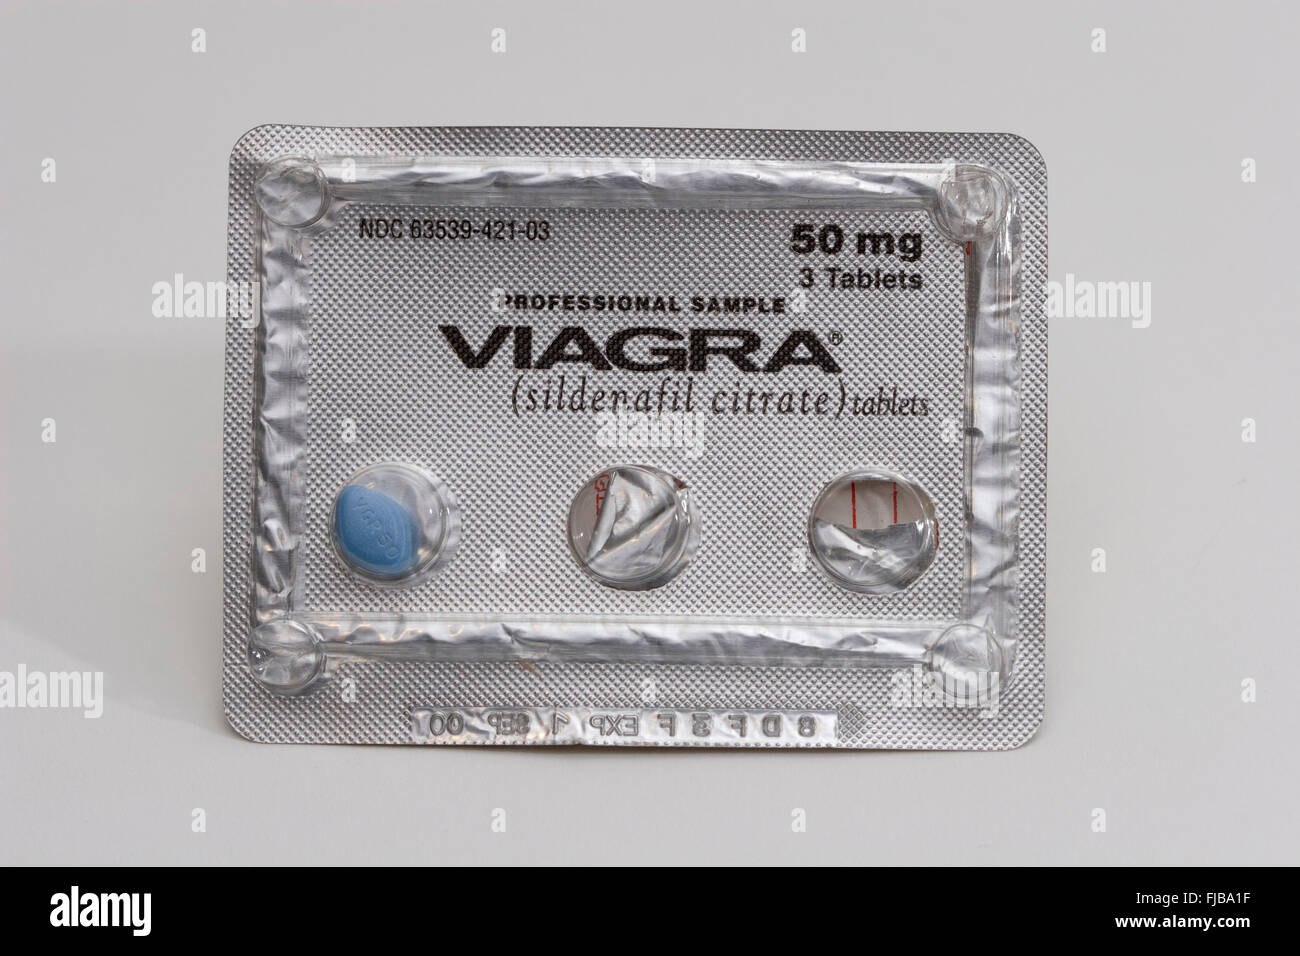 Sample 3 pack of viagra, two tablets missing. Stock Photo